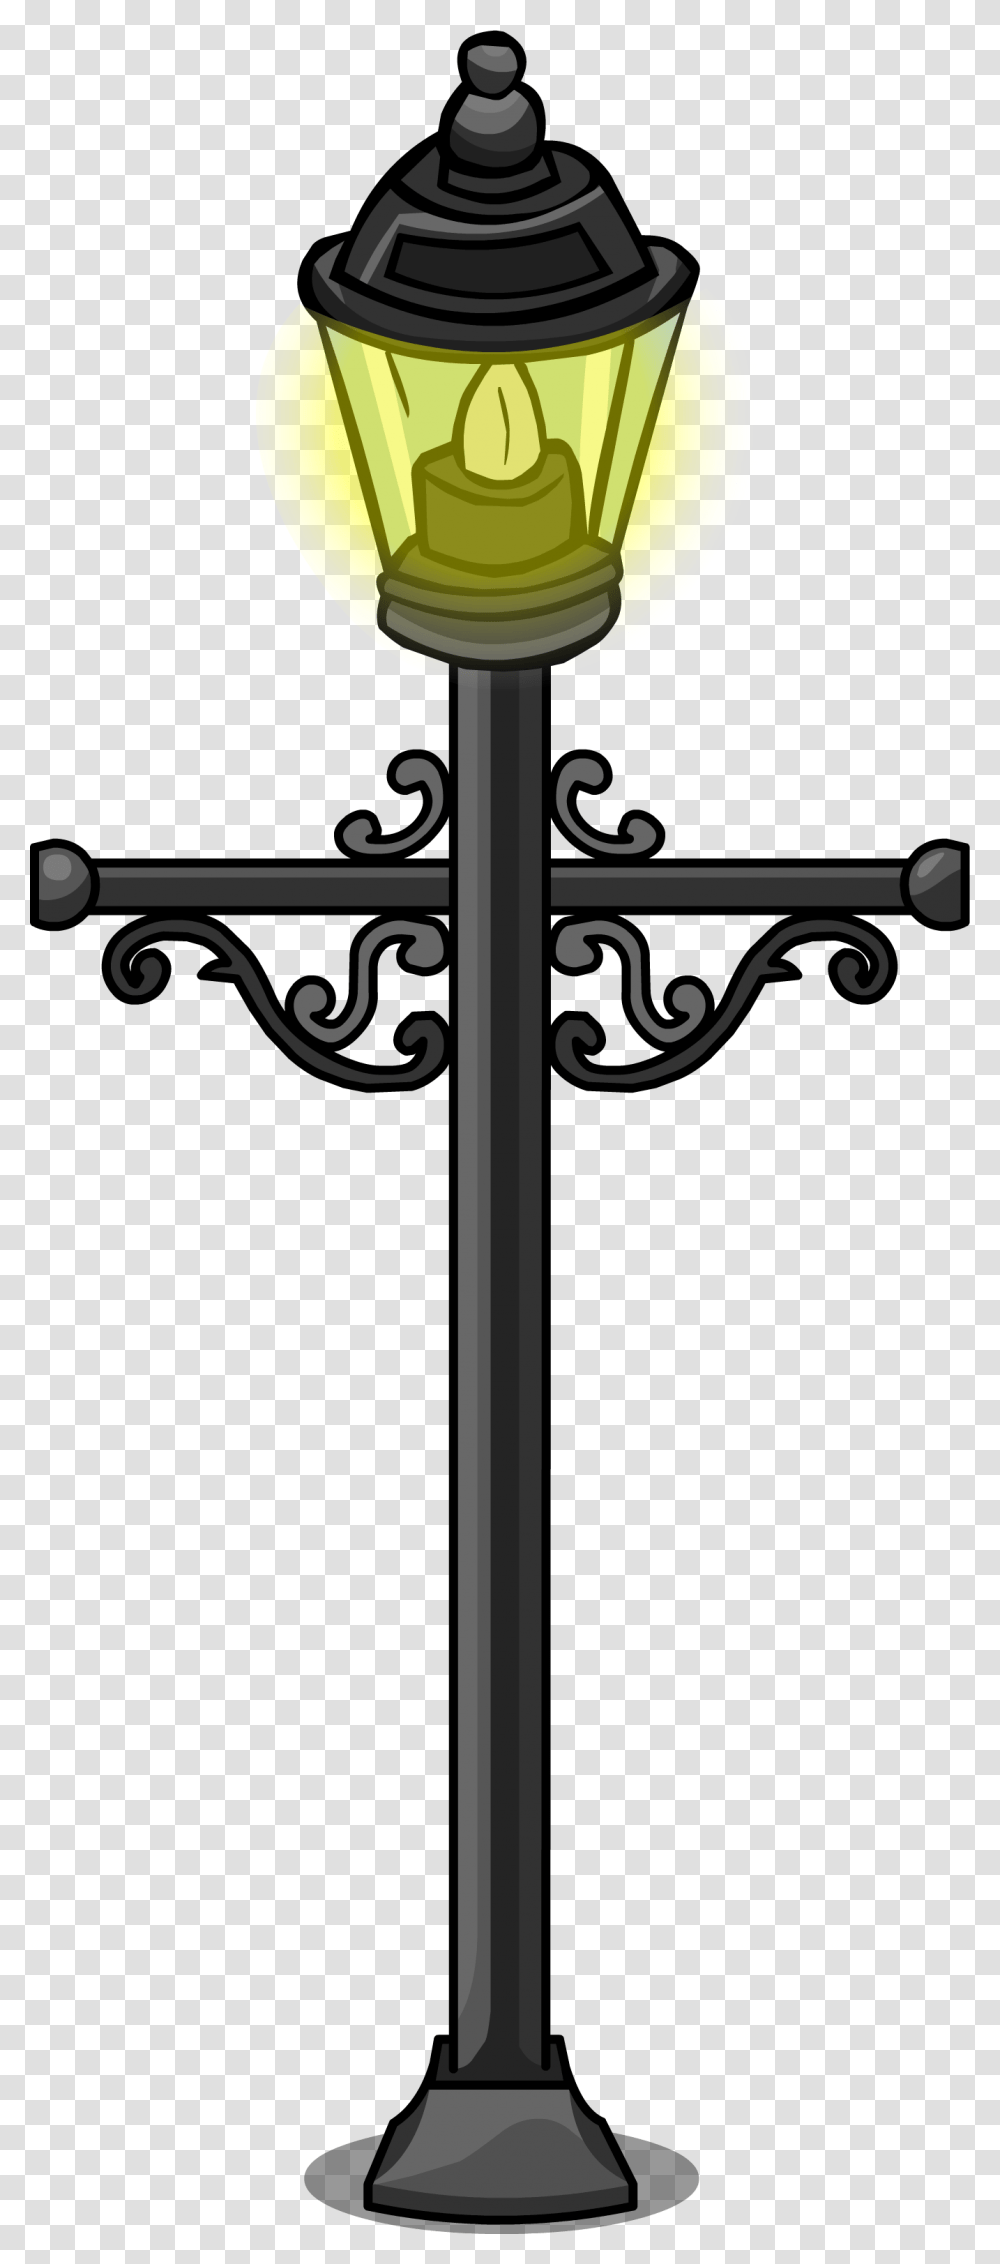 Wrought Iron Lamp Post Lamp Post Sprite, Coat Rack, Silhouette, Utility Pole Transparent Png